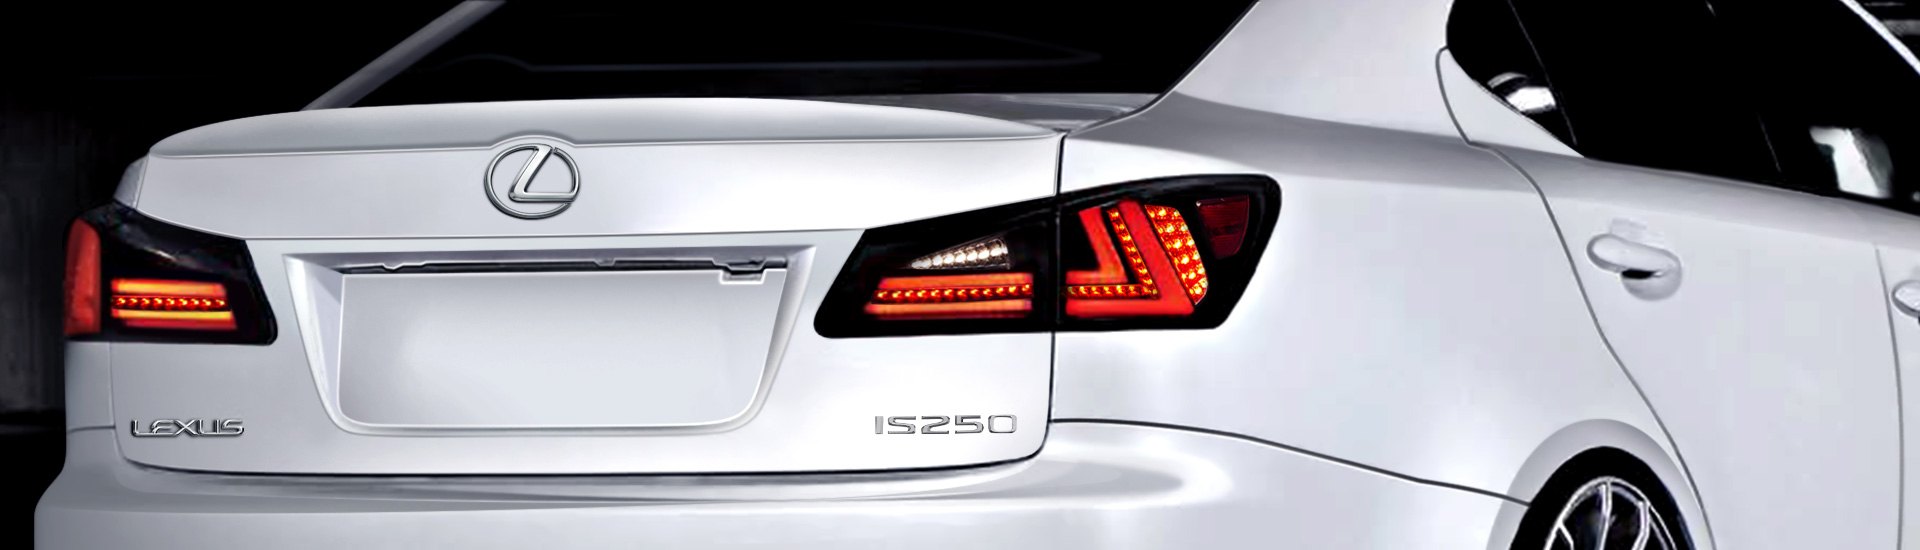 Spec-D New Product Release - Outstanding Fiber Optic LED Tail Lights for Lexus IS